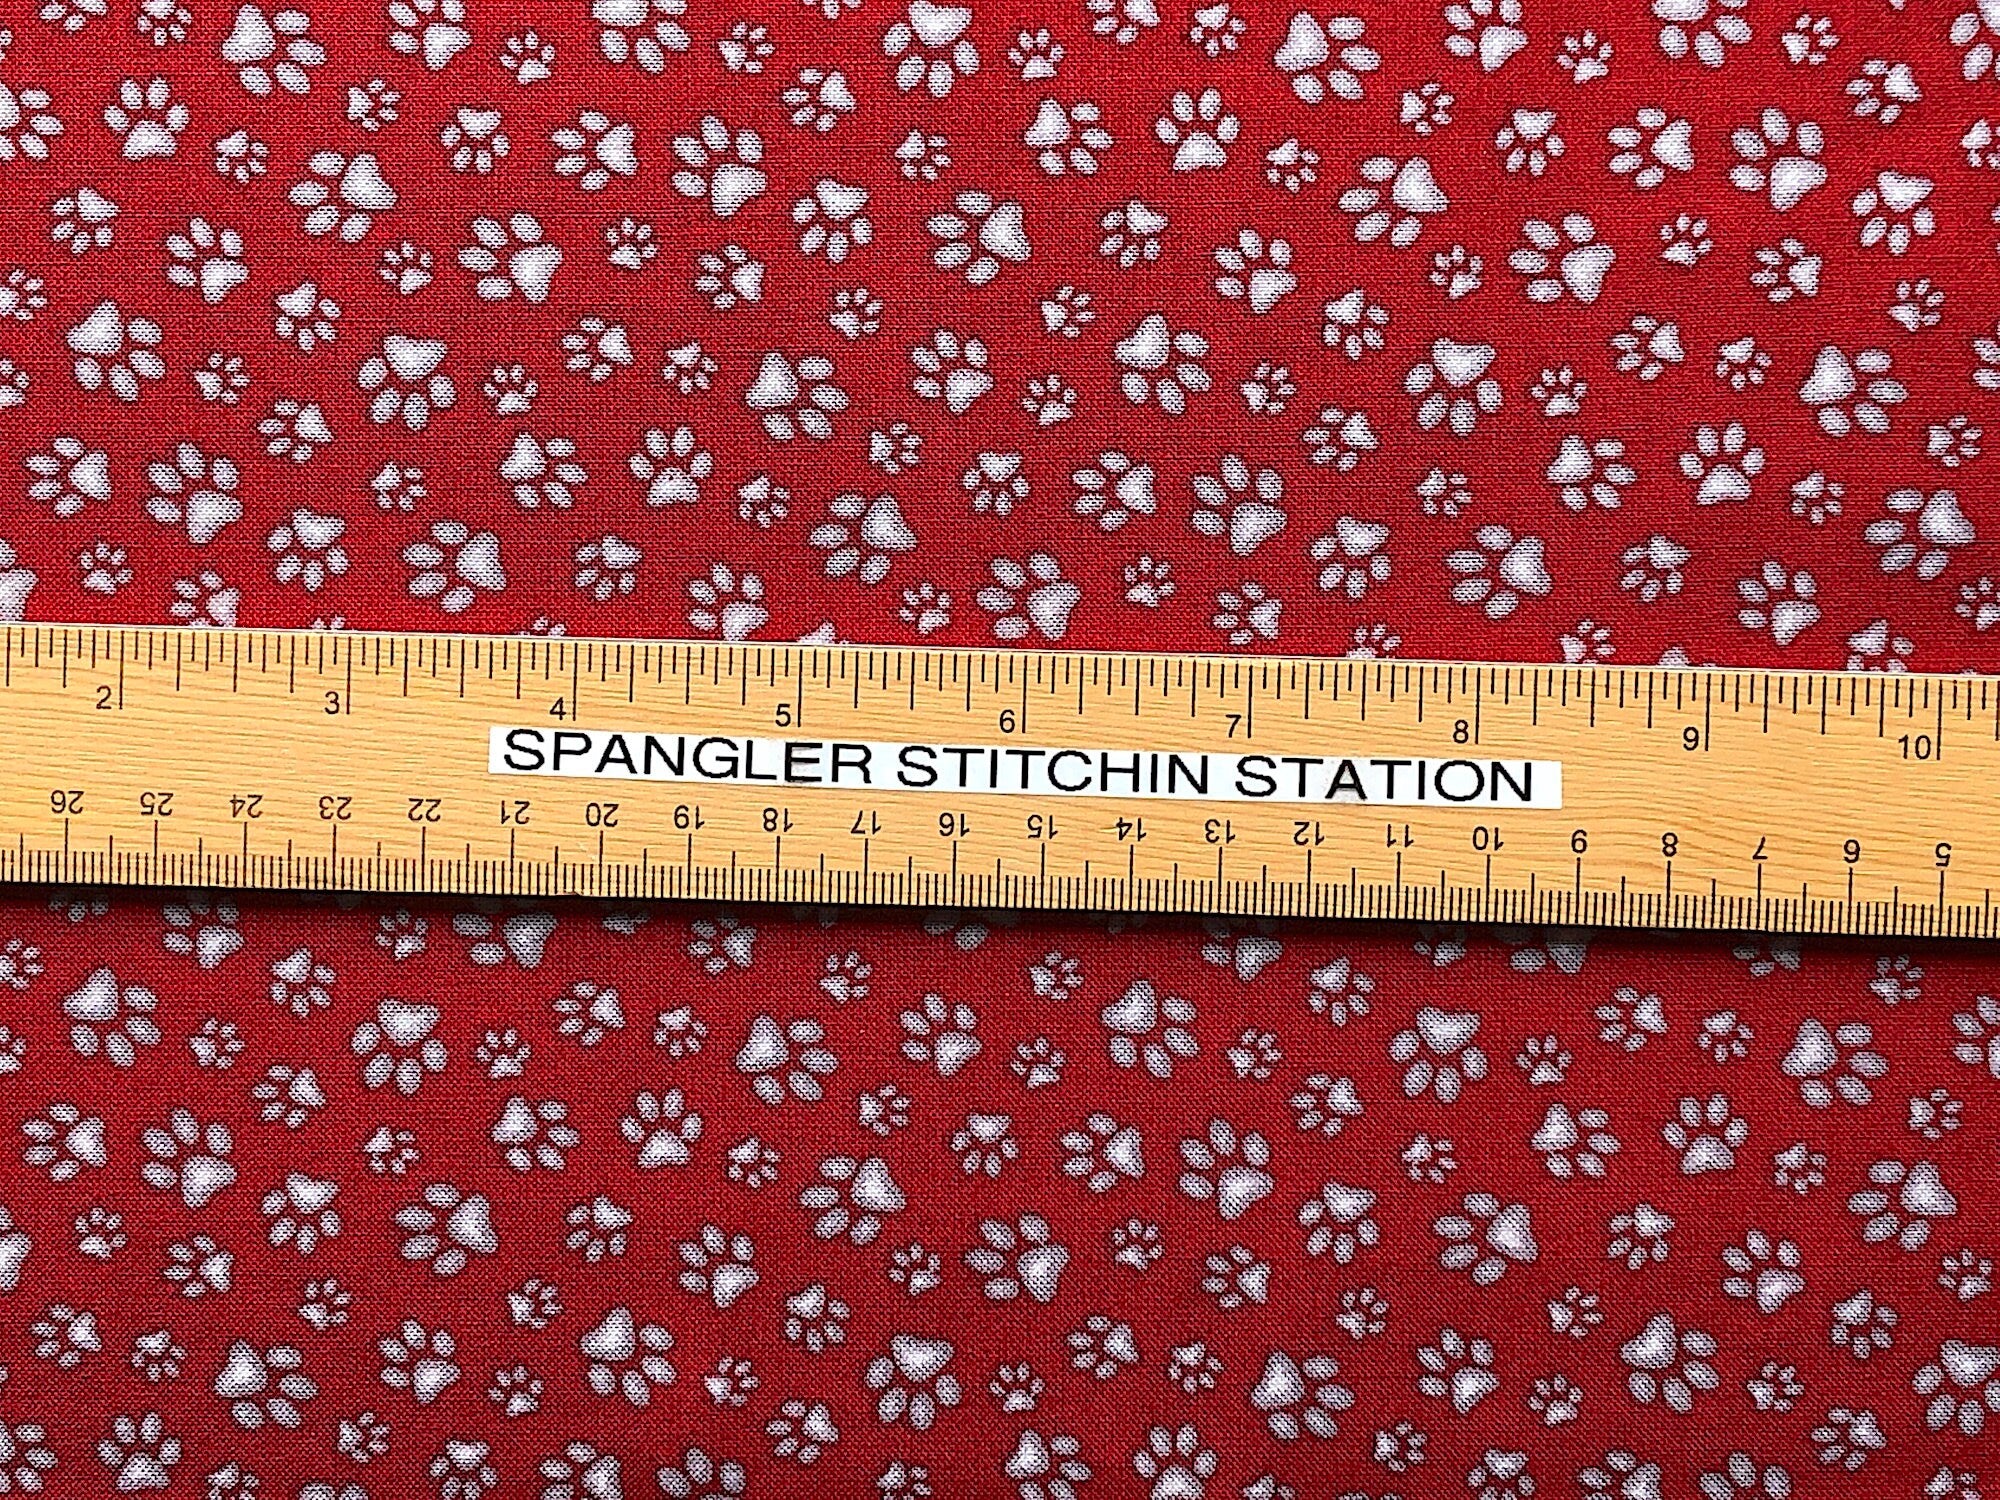 Ruler on fabric to show sizing.